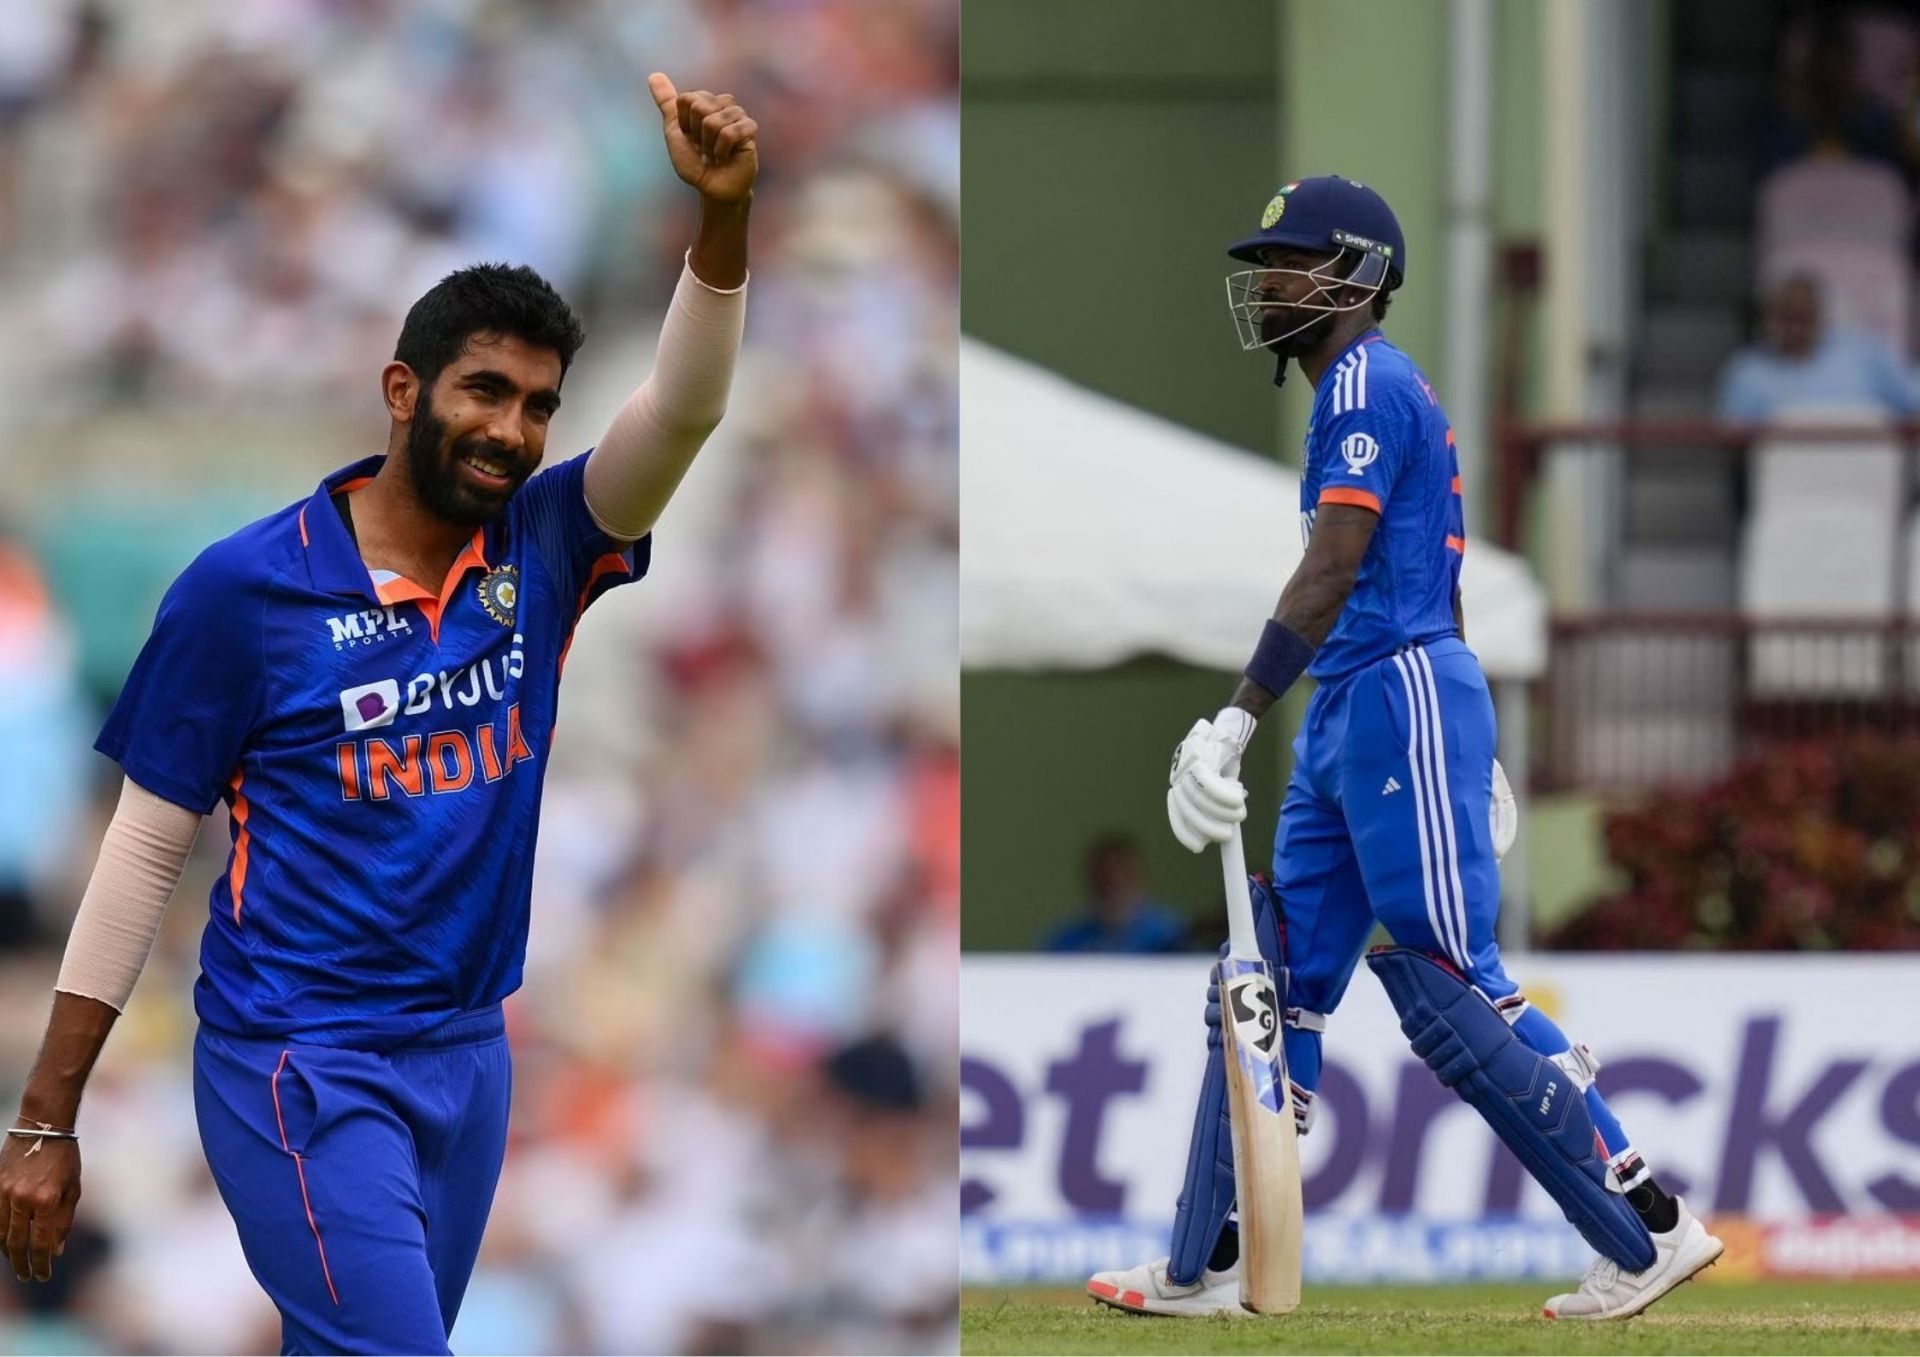 Jasprit Bumrah is currently captaining India in the T20s in Ireland with Hardik Pandya rested (Picture Credits: Getty Images; AP).